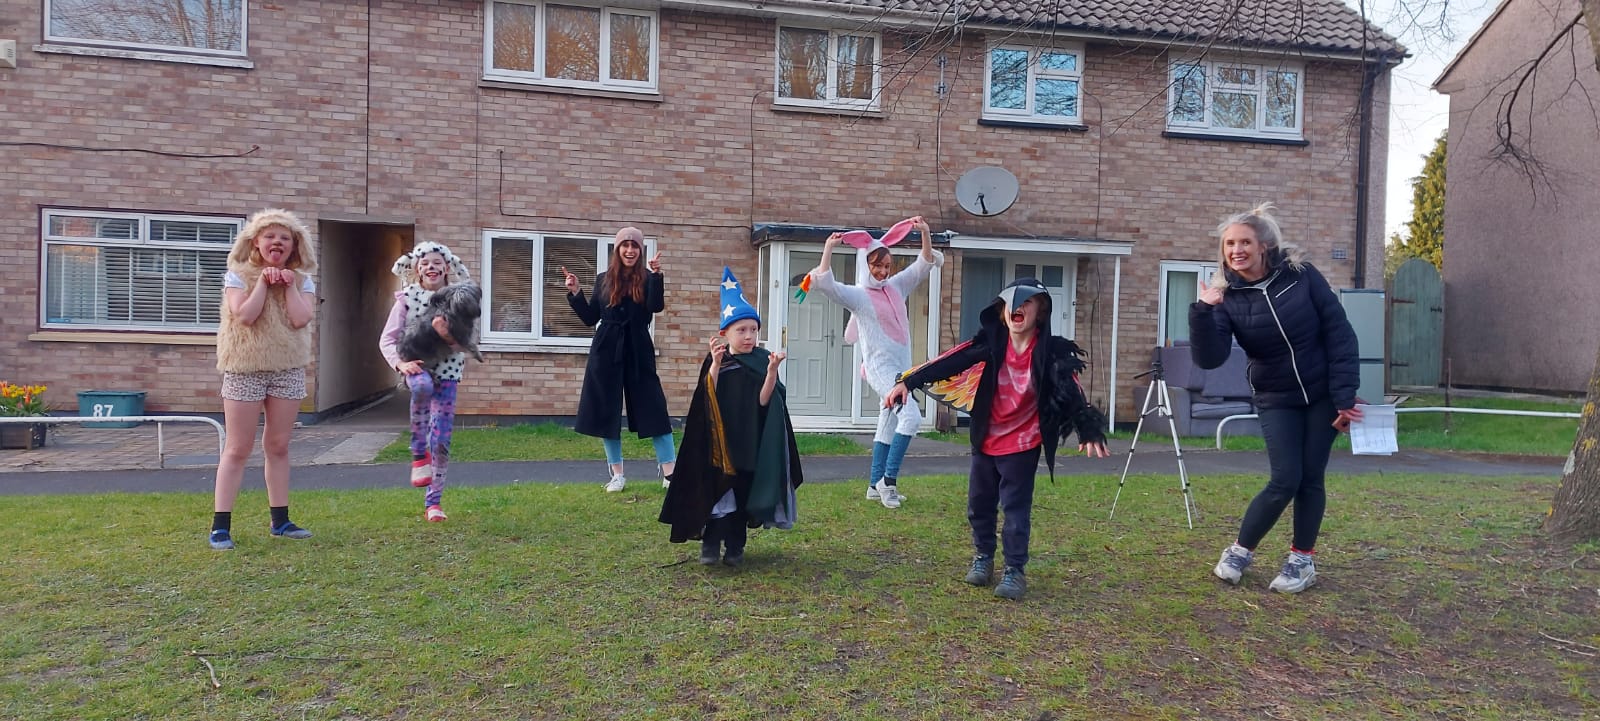 Seven people, three of whom are adults and four children, stand in differing costumes in front of a row of houses